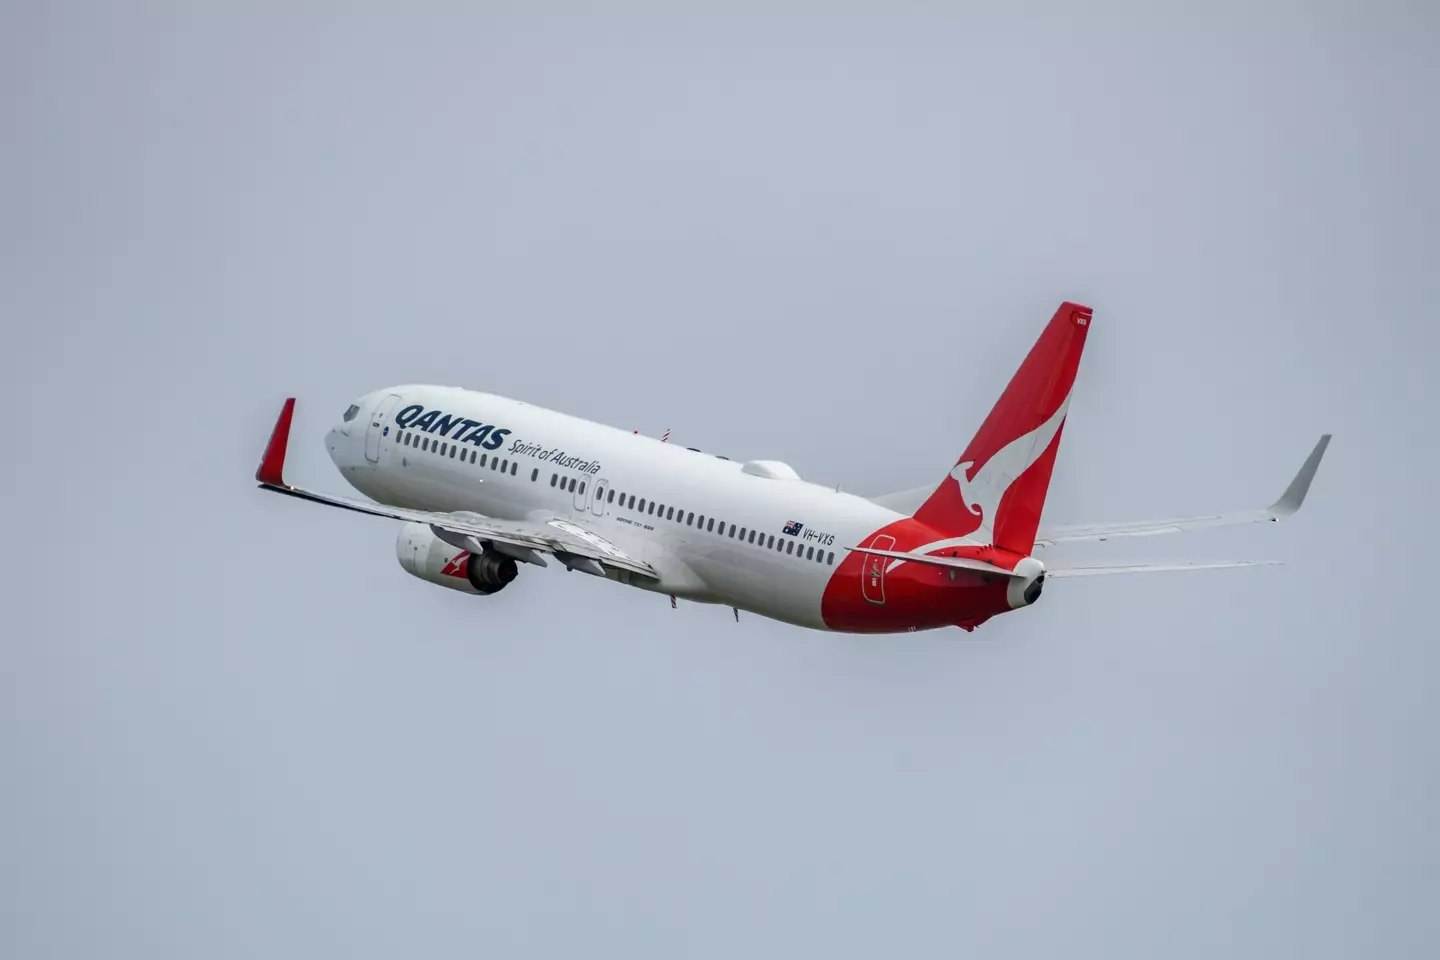 Qantas will reportedly refund the money in two weeks.